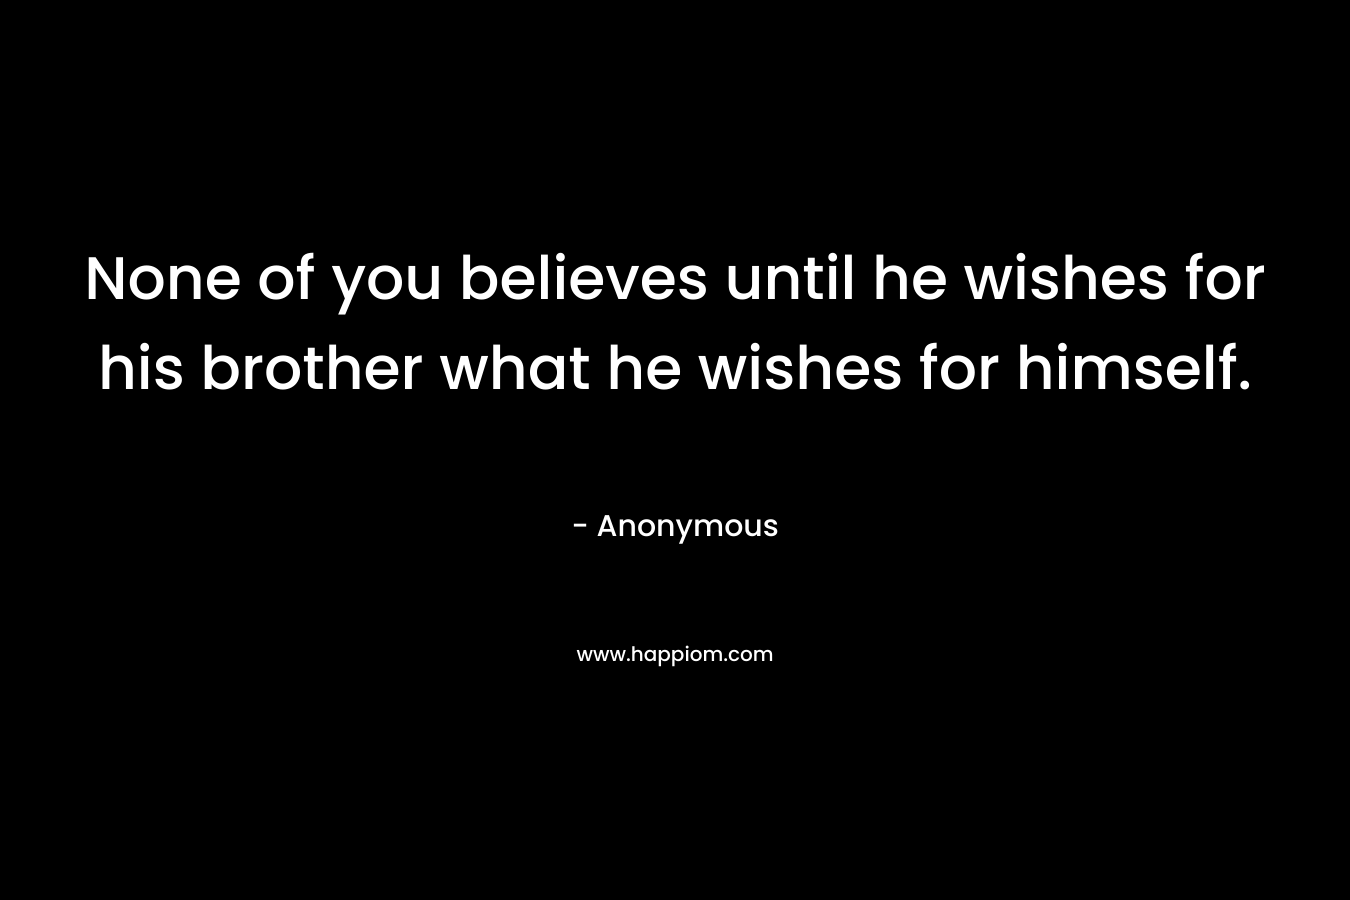 None of you believes until he wishes for his brother what he wishes for himself.